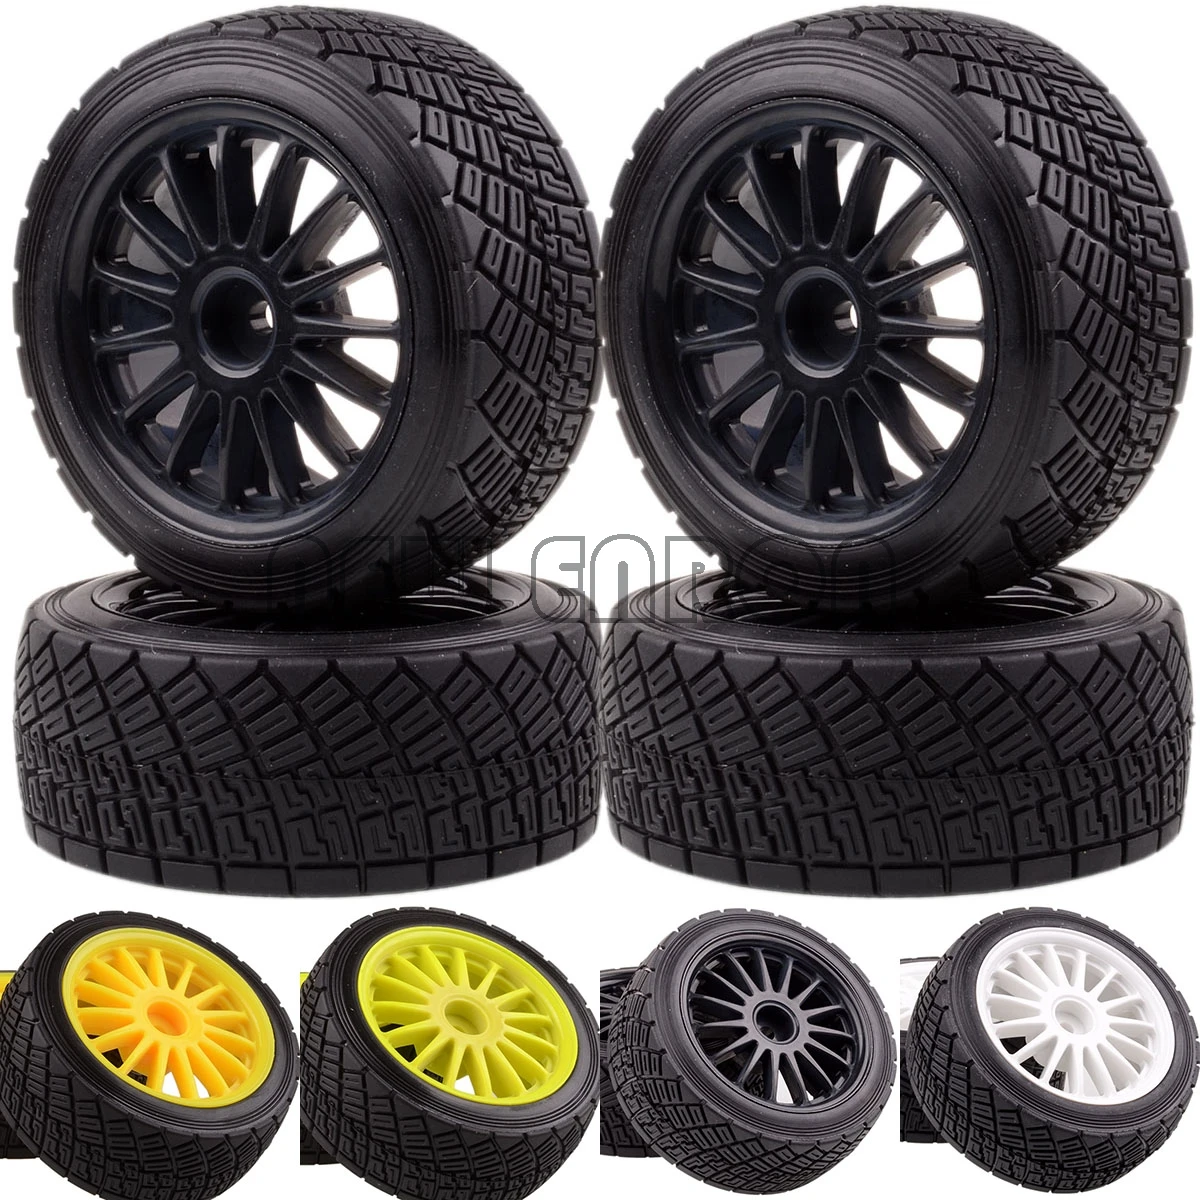 

NEW ENRON 2.2" Wheel Rims Hub & 80MM Rubber Tires Tyre 4P RC CAR 1/10 Fit HPI WR8 Flux Rally 3.0 110697 94177 108076 108075